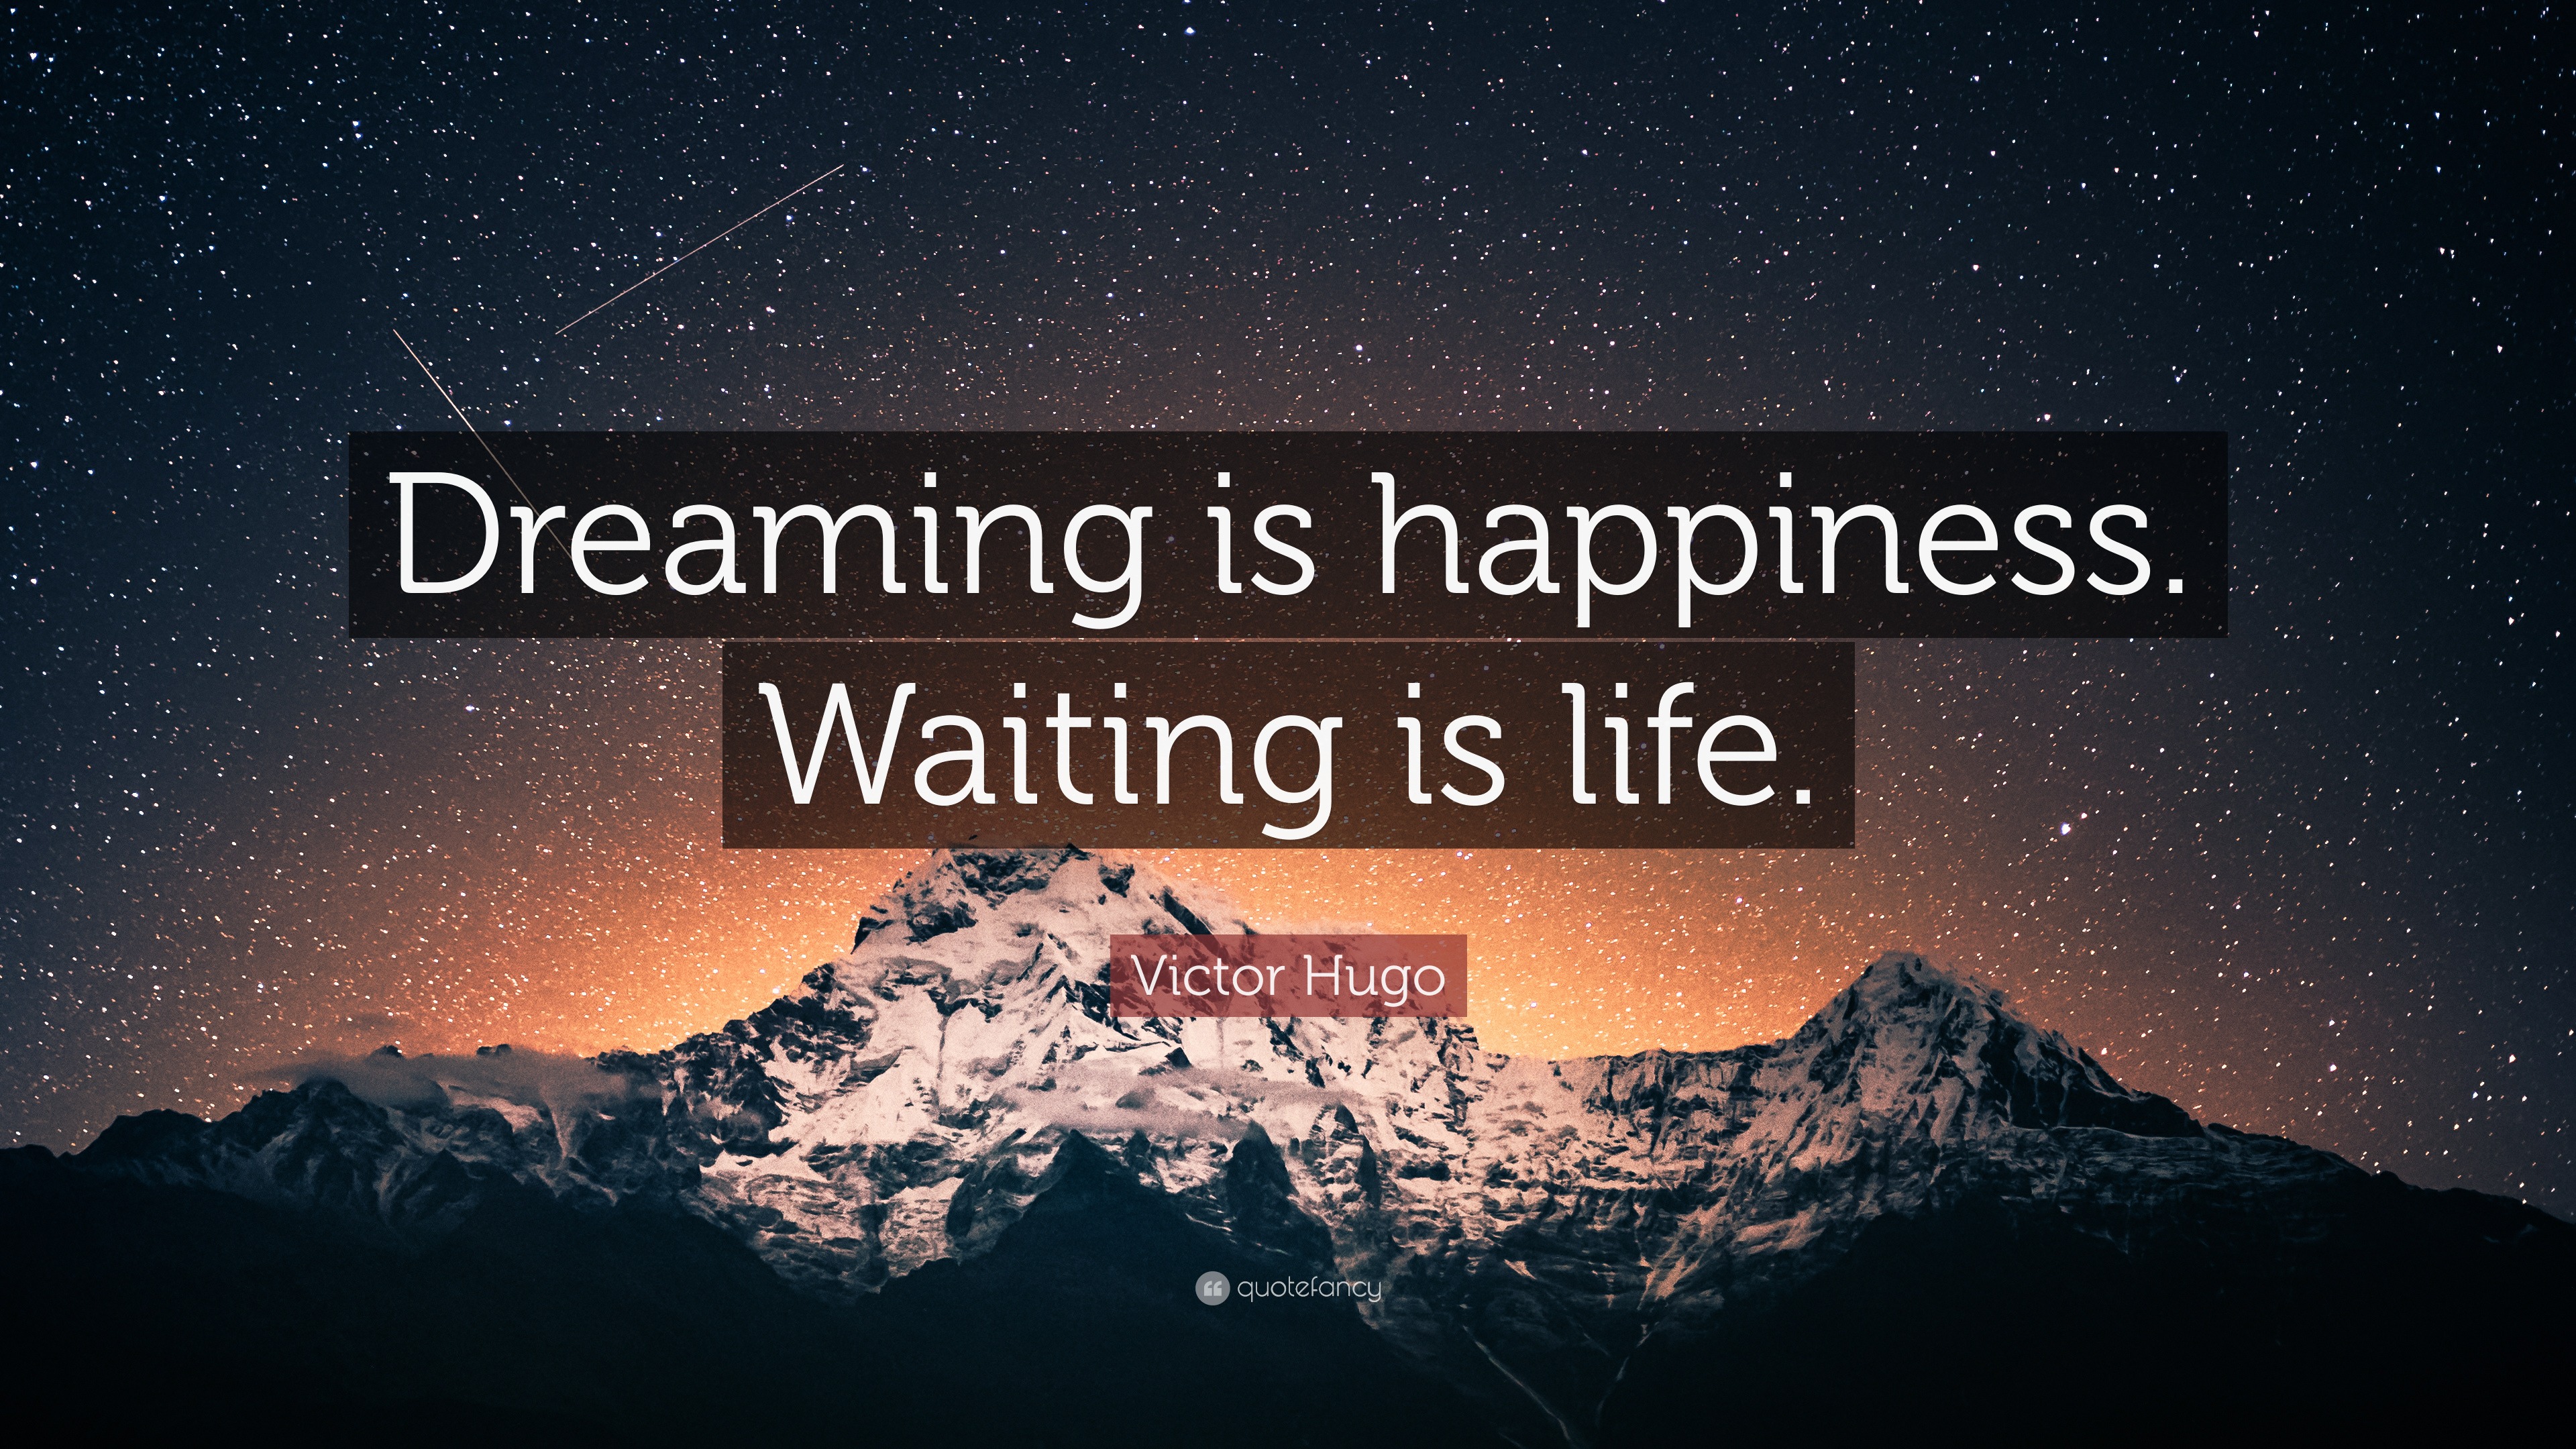 Victor Hugo Quote: “Dreaming is happiness. Waiting is life.”